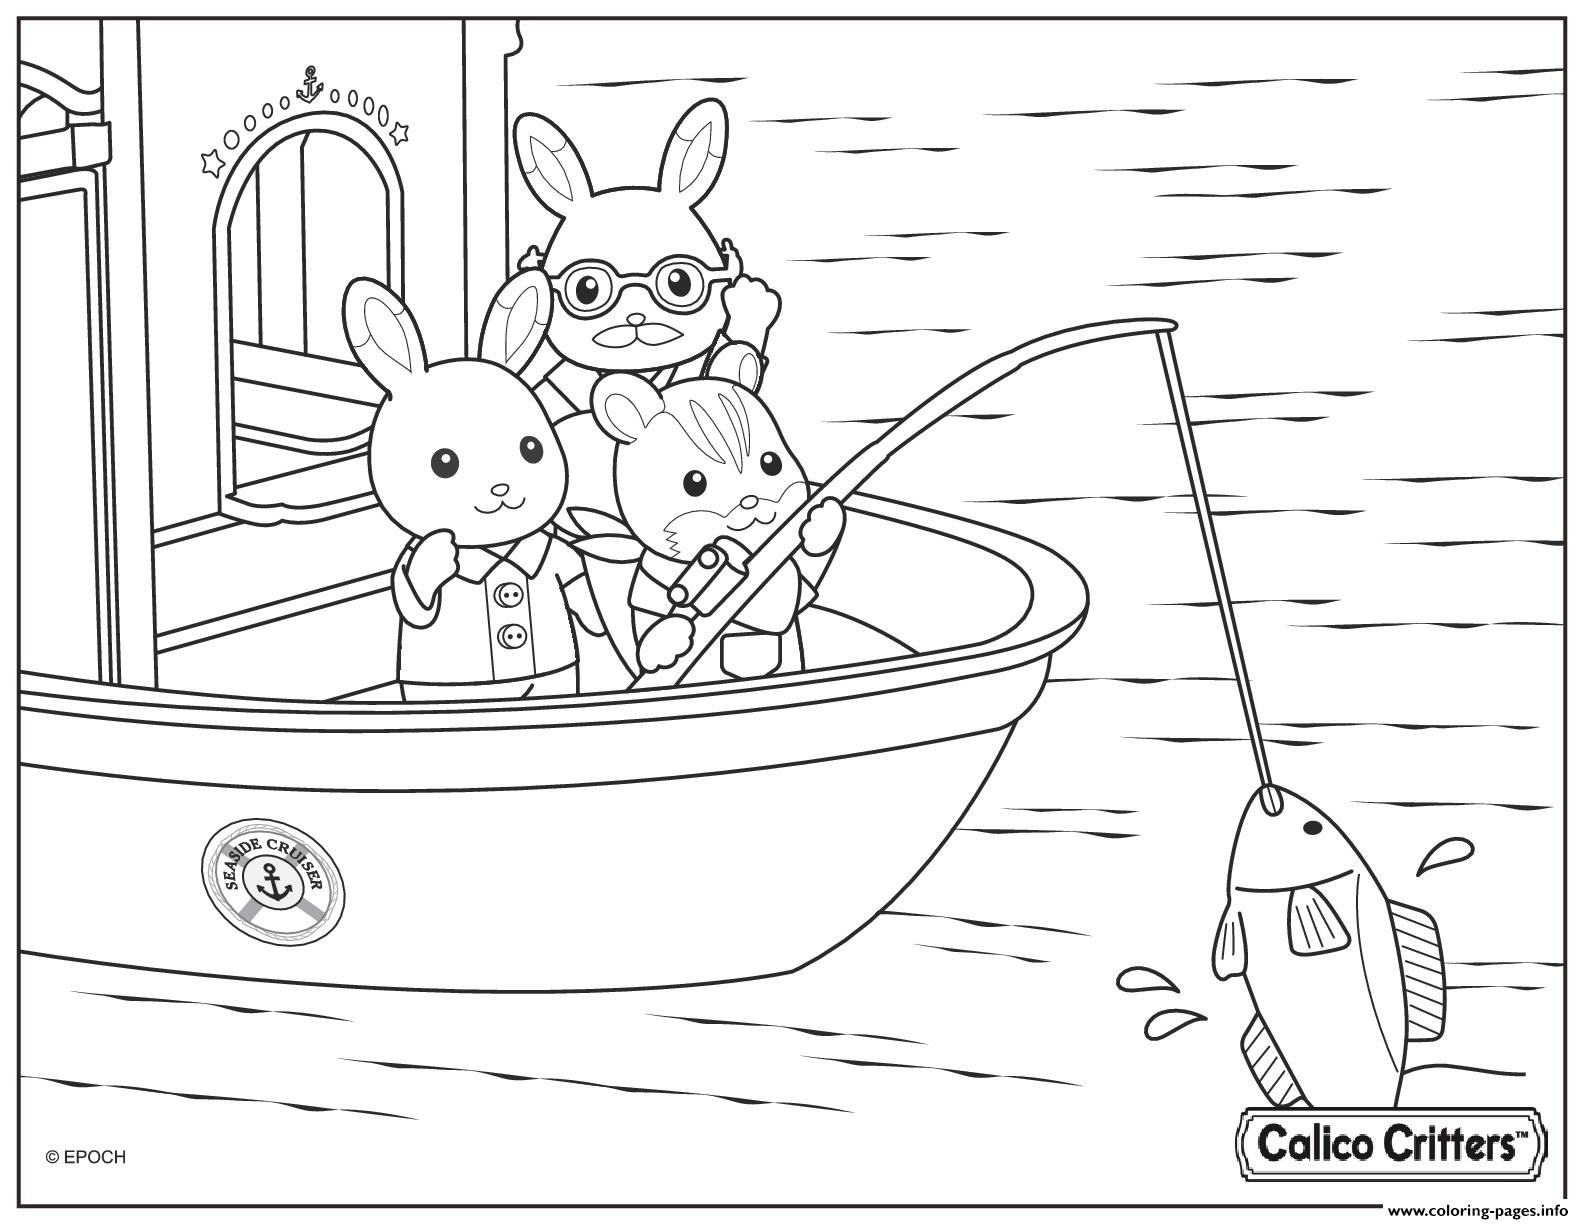 Calico Critters Fishing Coloring Pages Printable